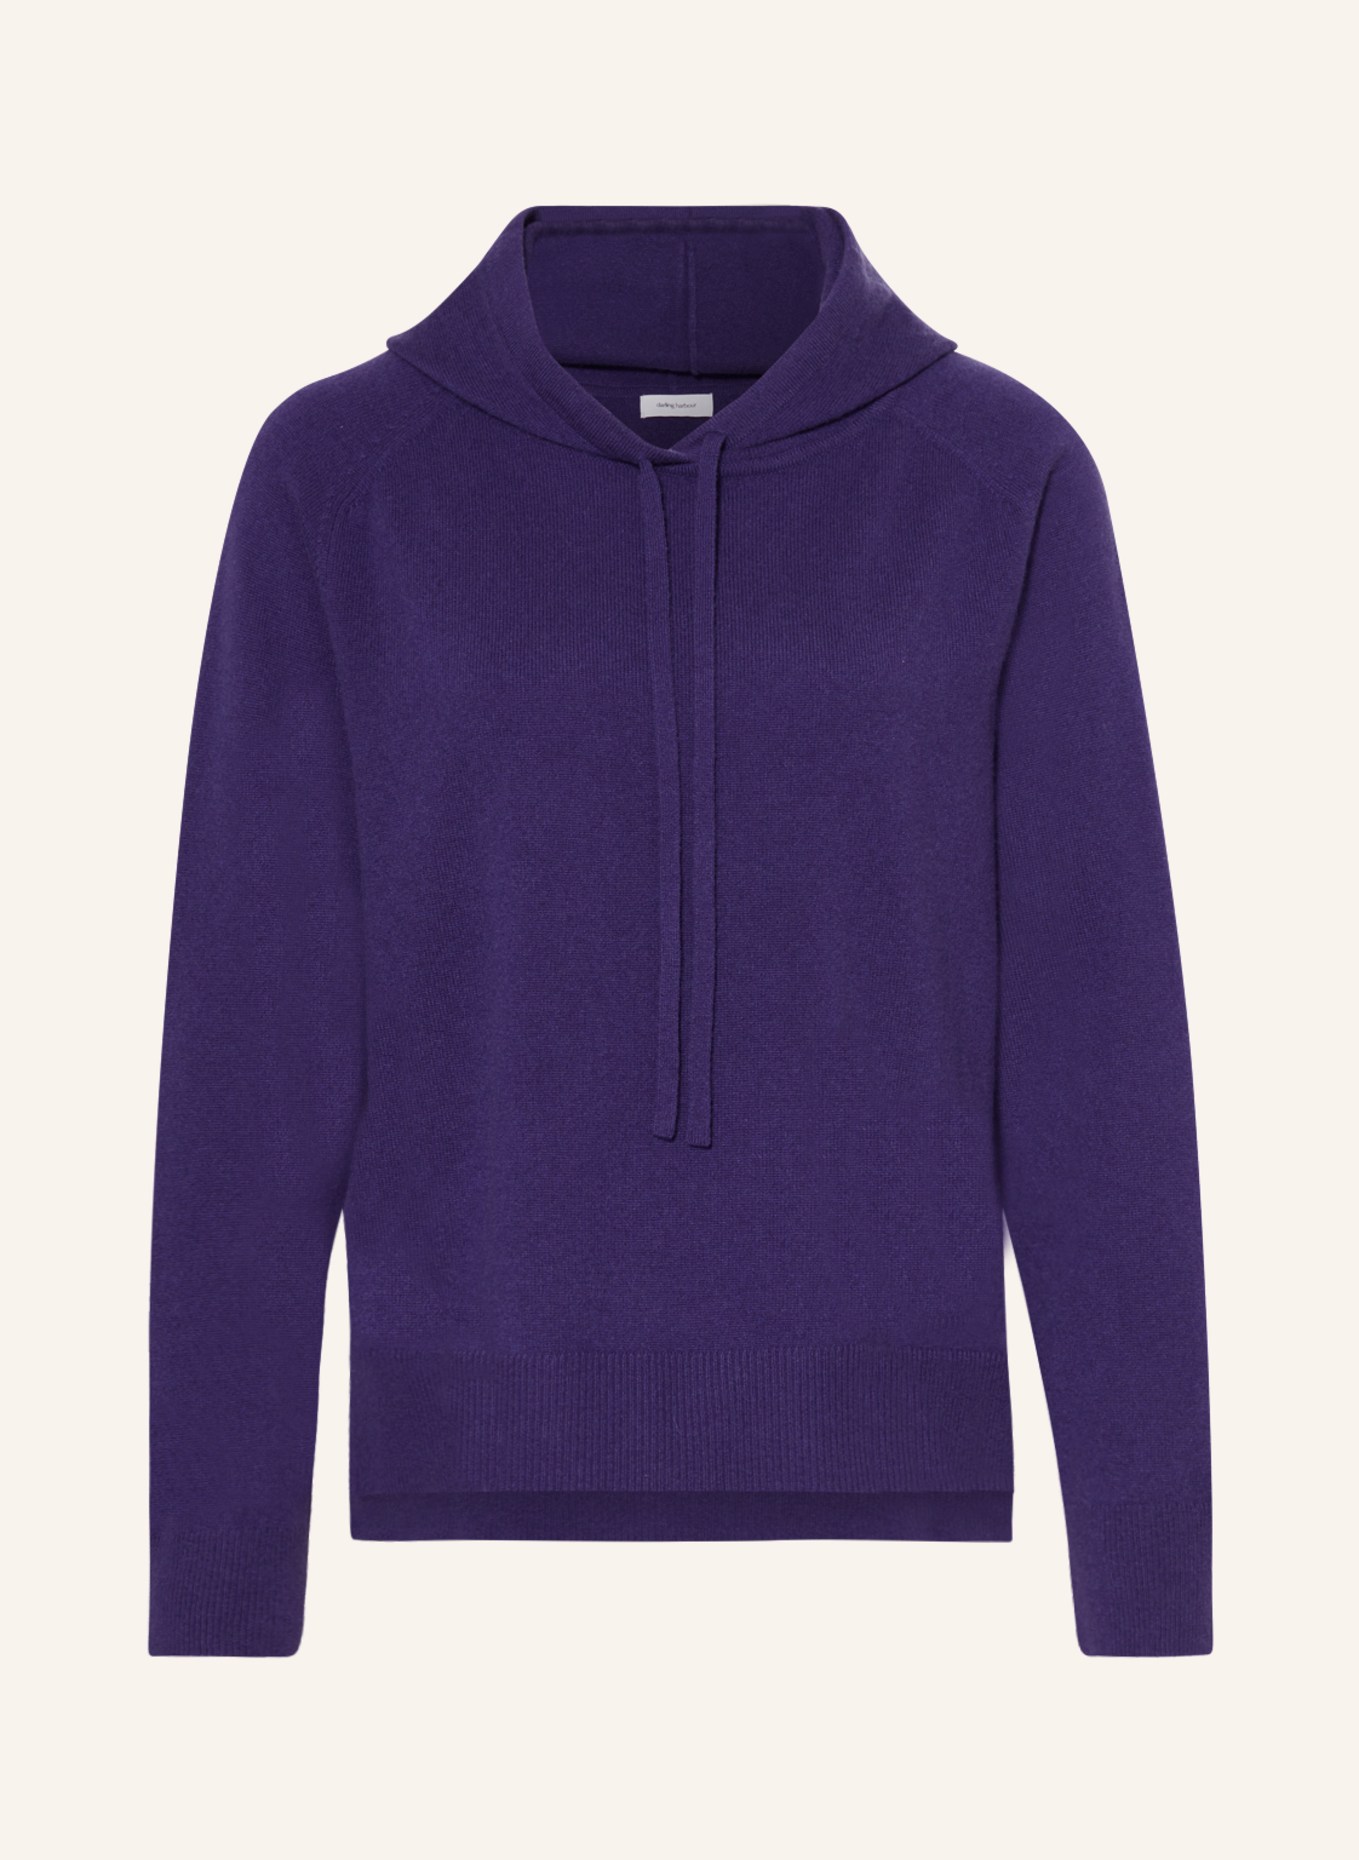 darling harbour Cashmere-Hoodie, Farbe: LILA (Bild 1)